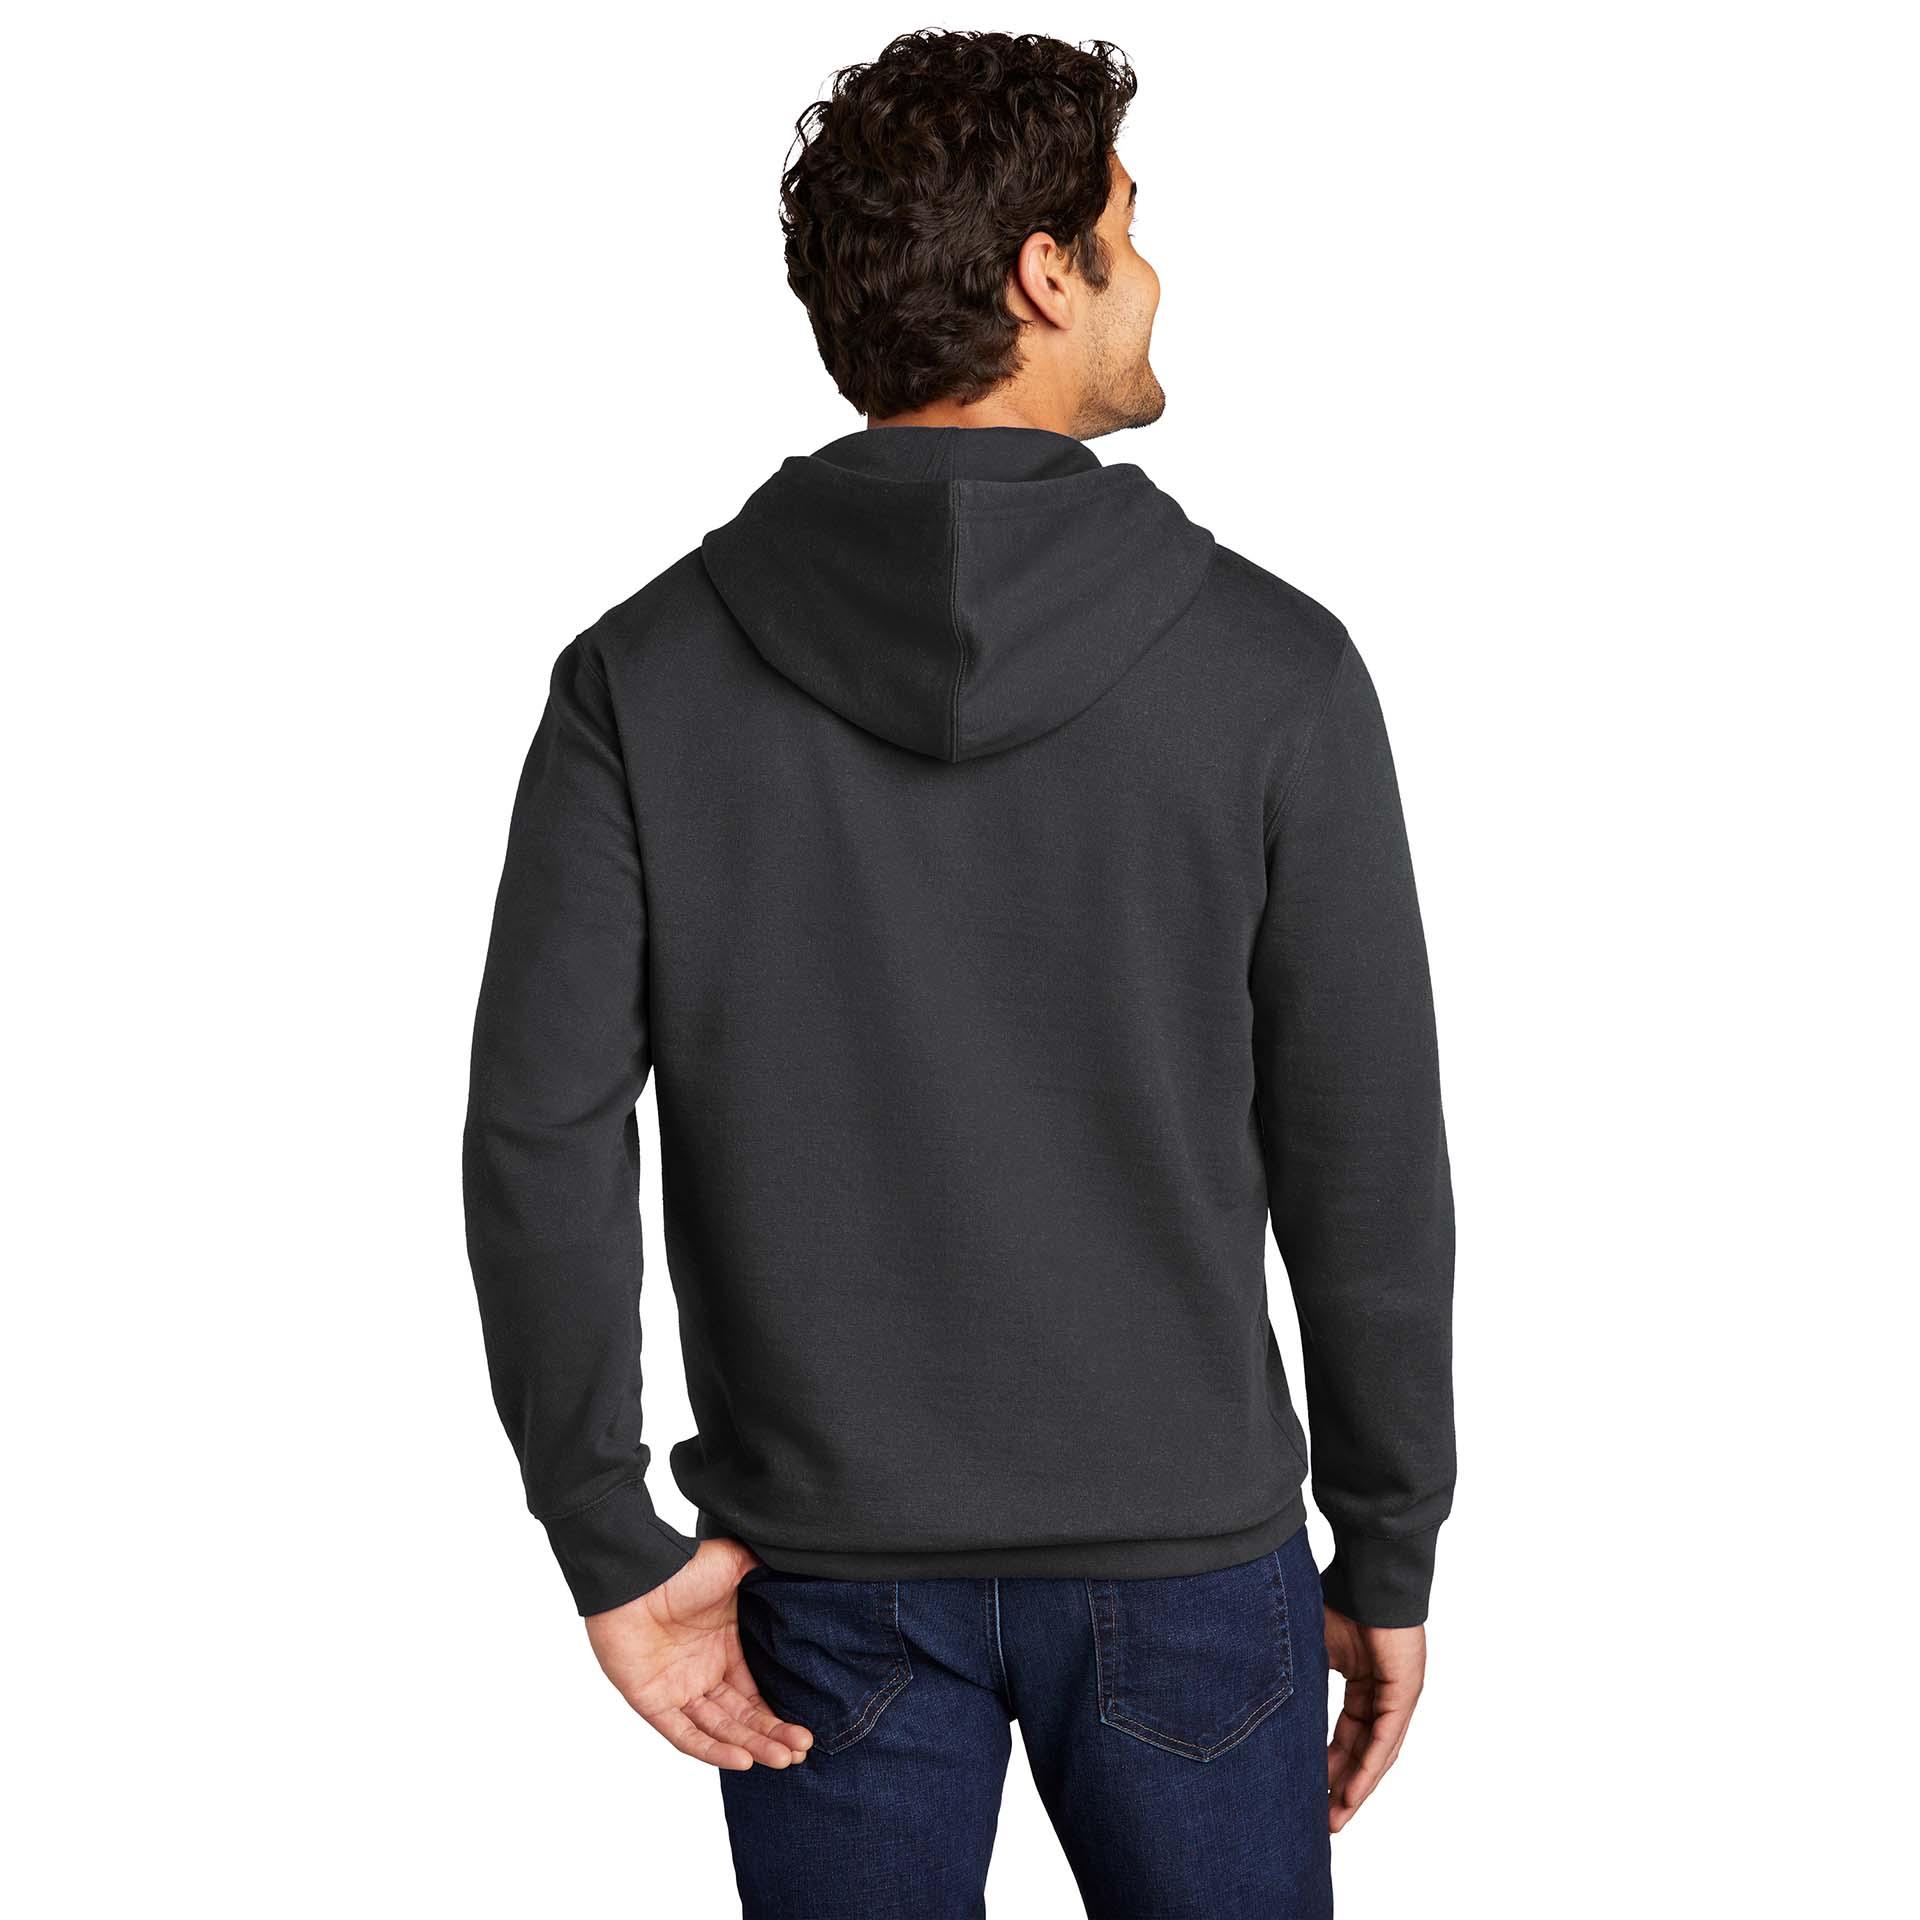 District DT6100 V.I.T. Fleece Pullover Hoodie - Charcoal | Full Source